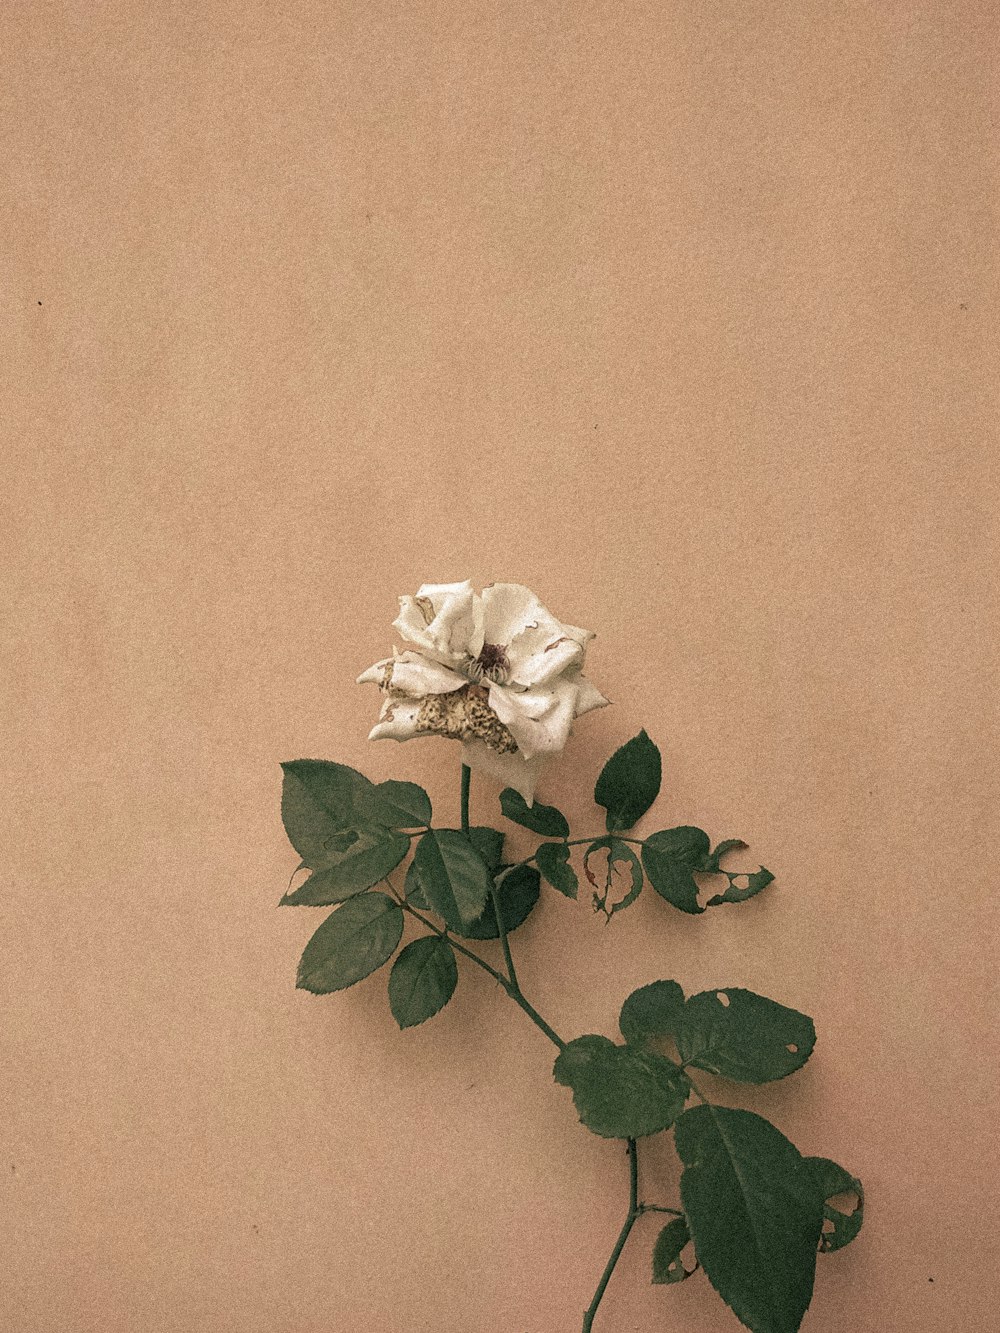 a single white rose on a brown background